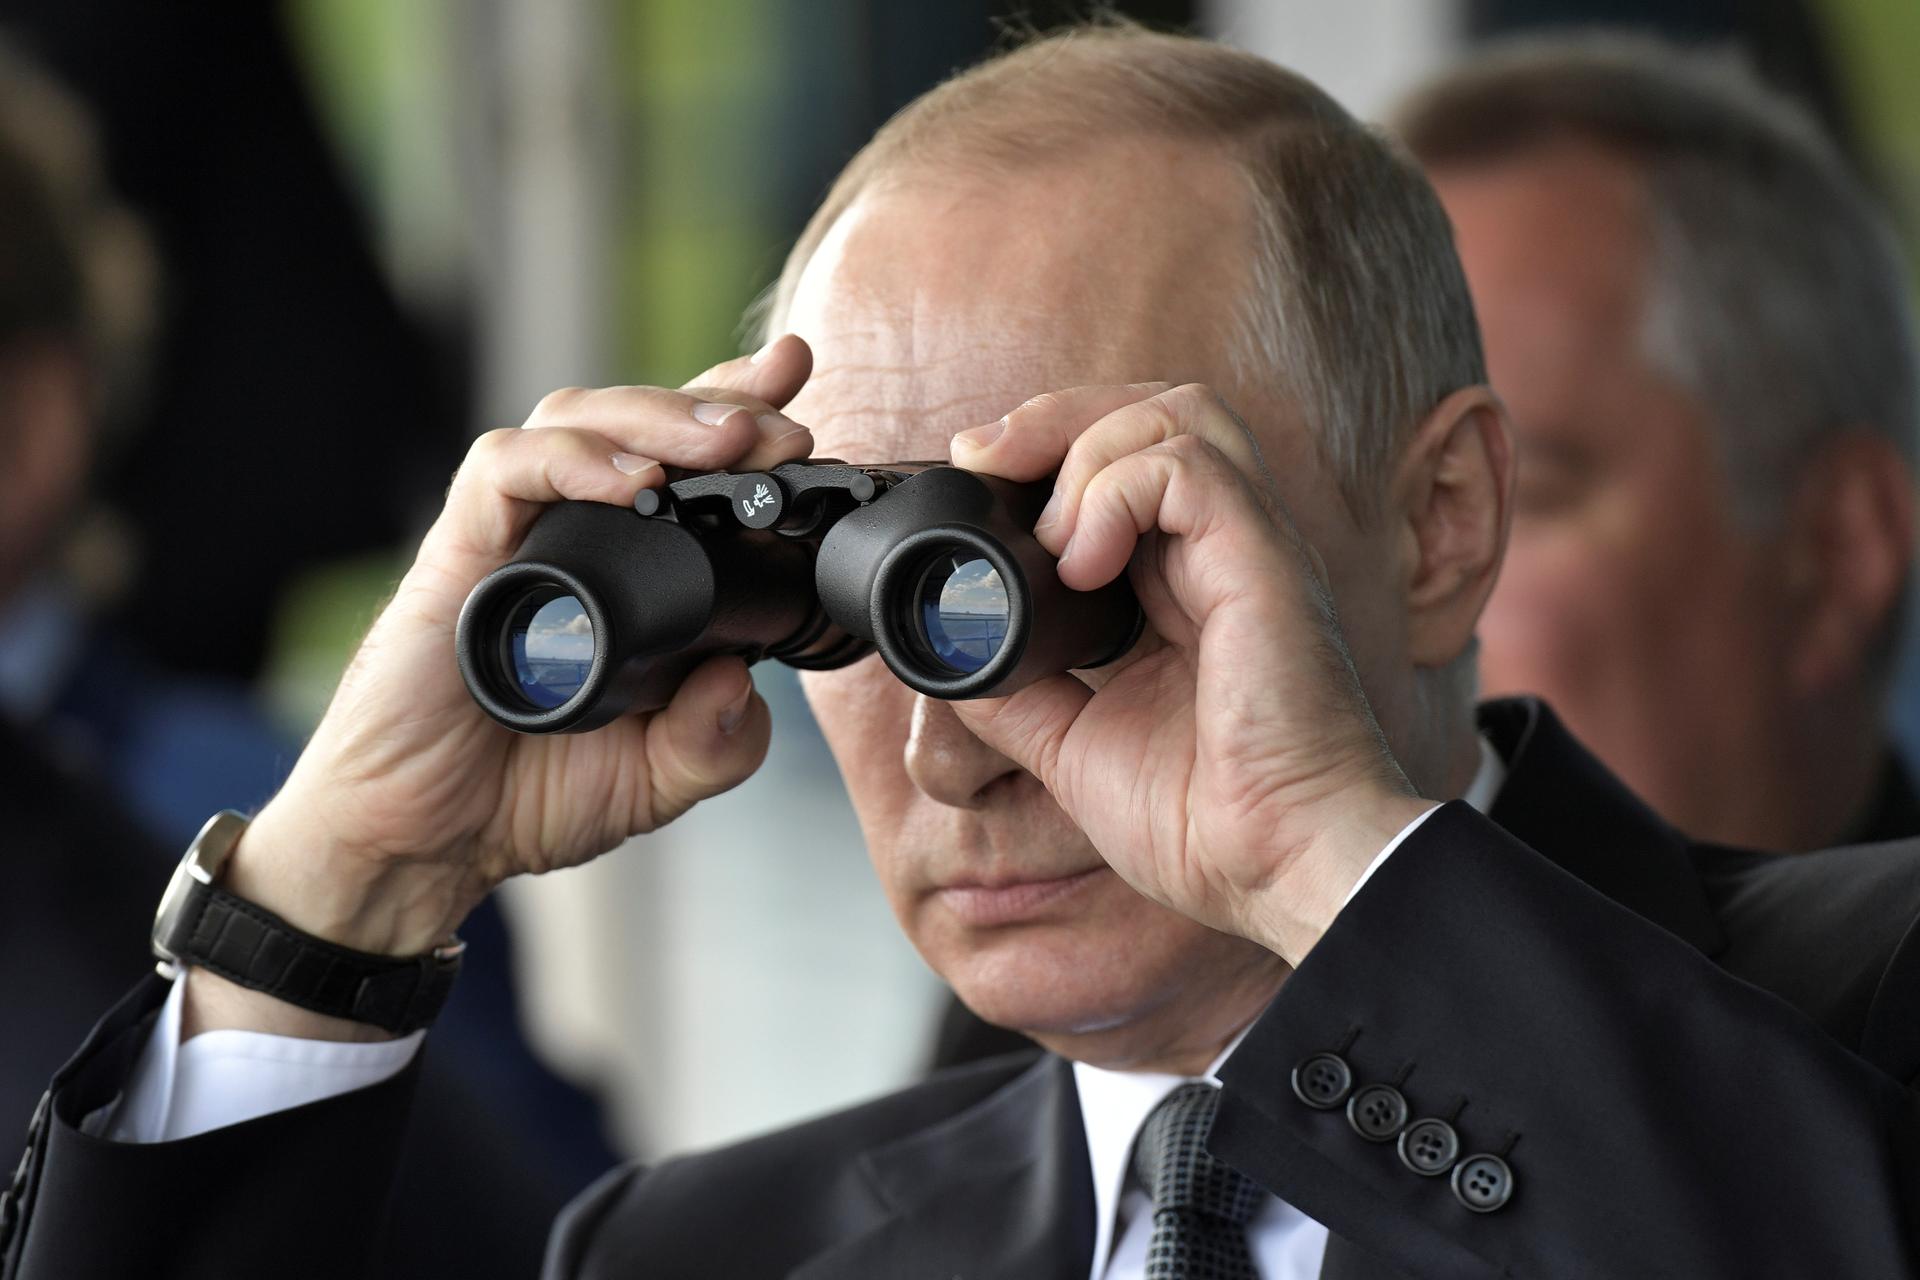 Russian President Vladimir Putin uses a pair of binoculars as he watches a display during the MAKS 2017 air show in Zhukovsky, outside Moscow.